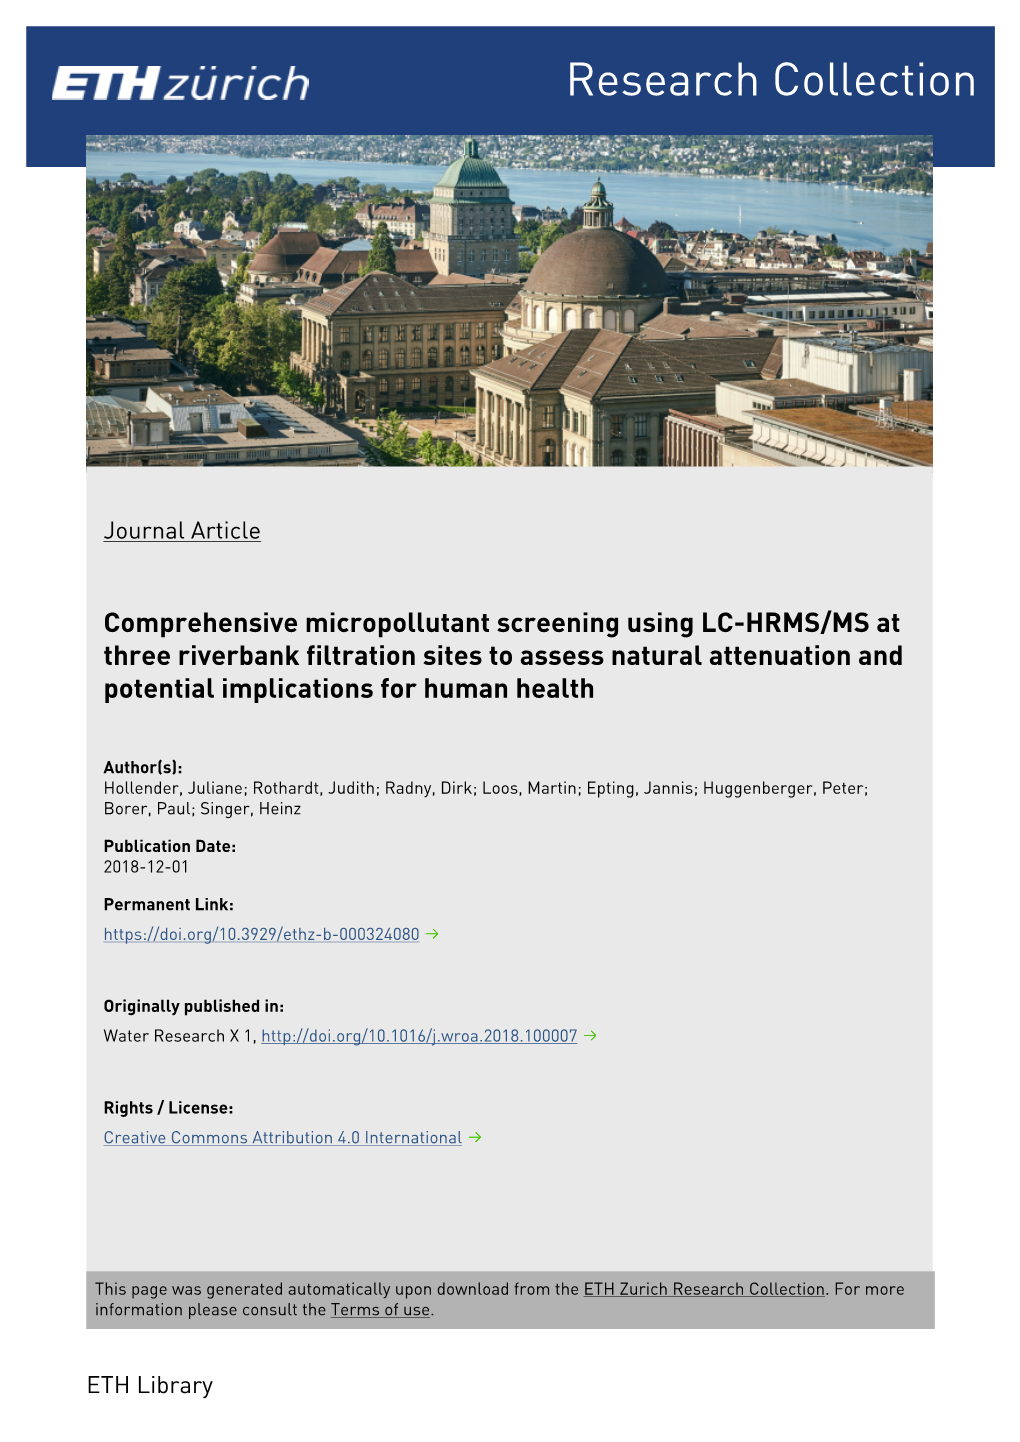 Comprehensive Micropollutant Screening Using LC-HRMS/MS at Three Riverbank Filtration Sites to Assess Natural Attenuation and Potential Implications for Human Health